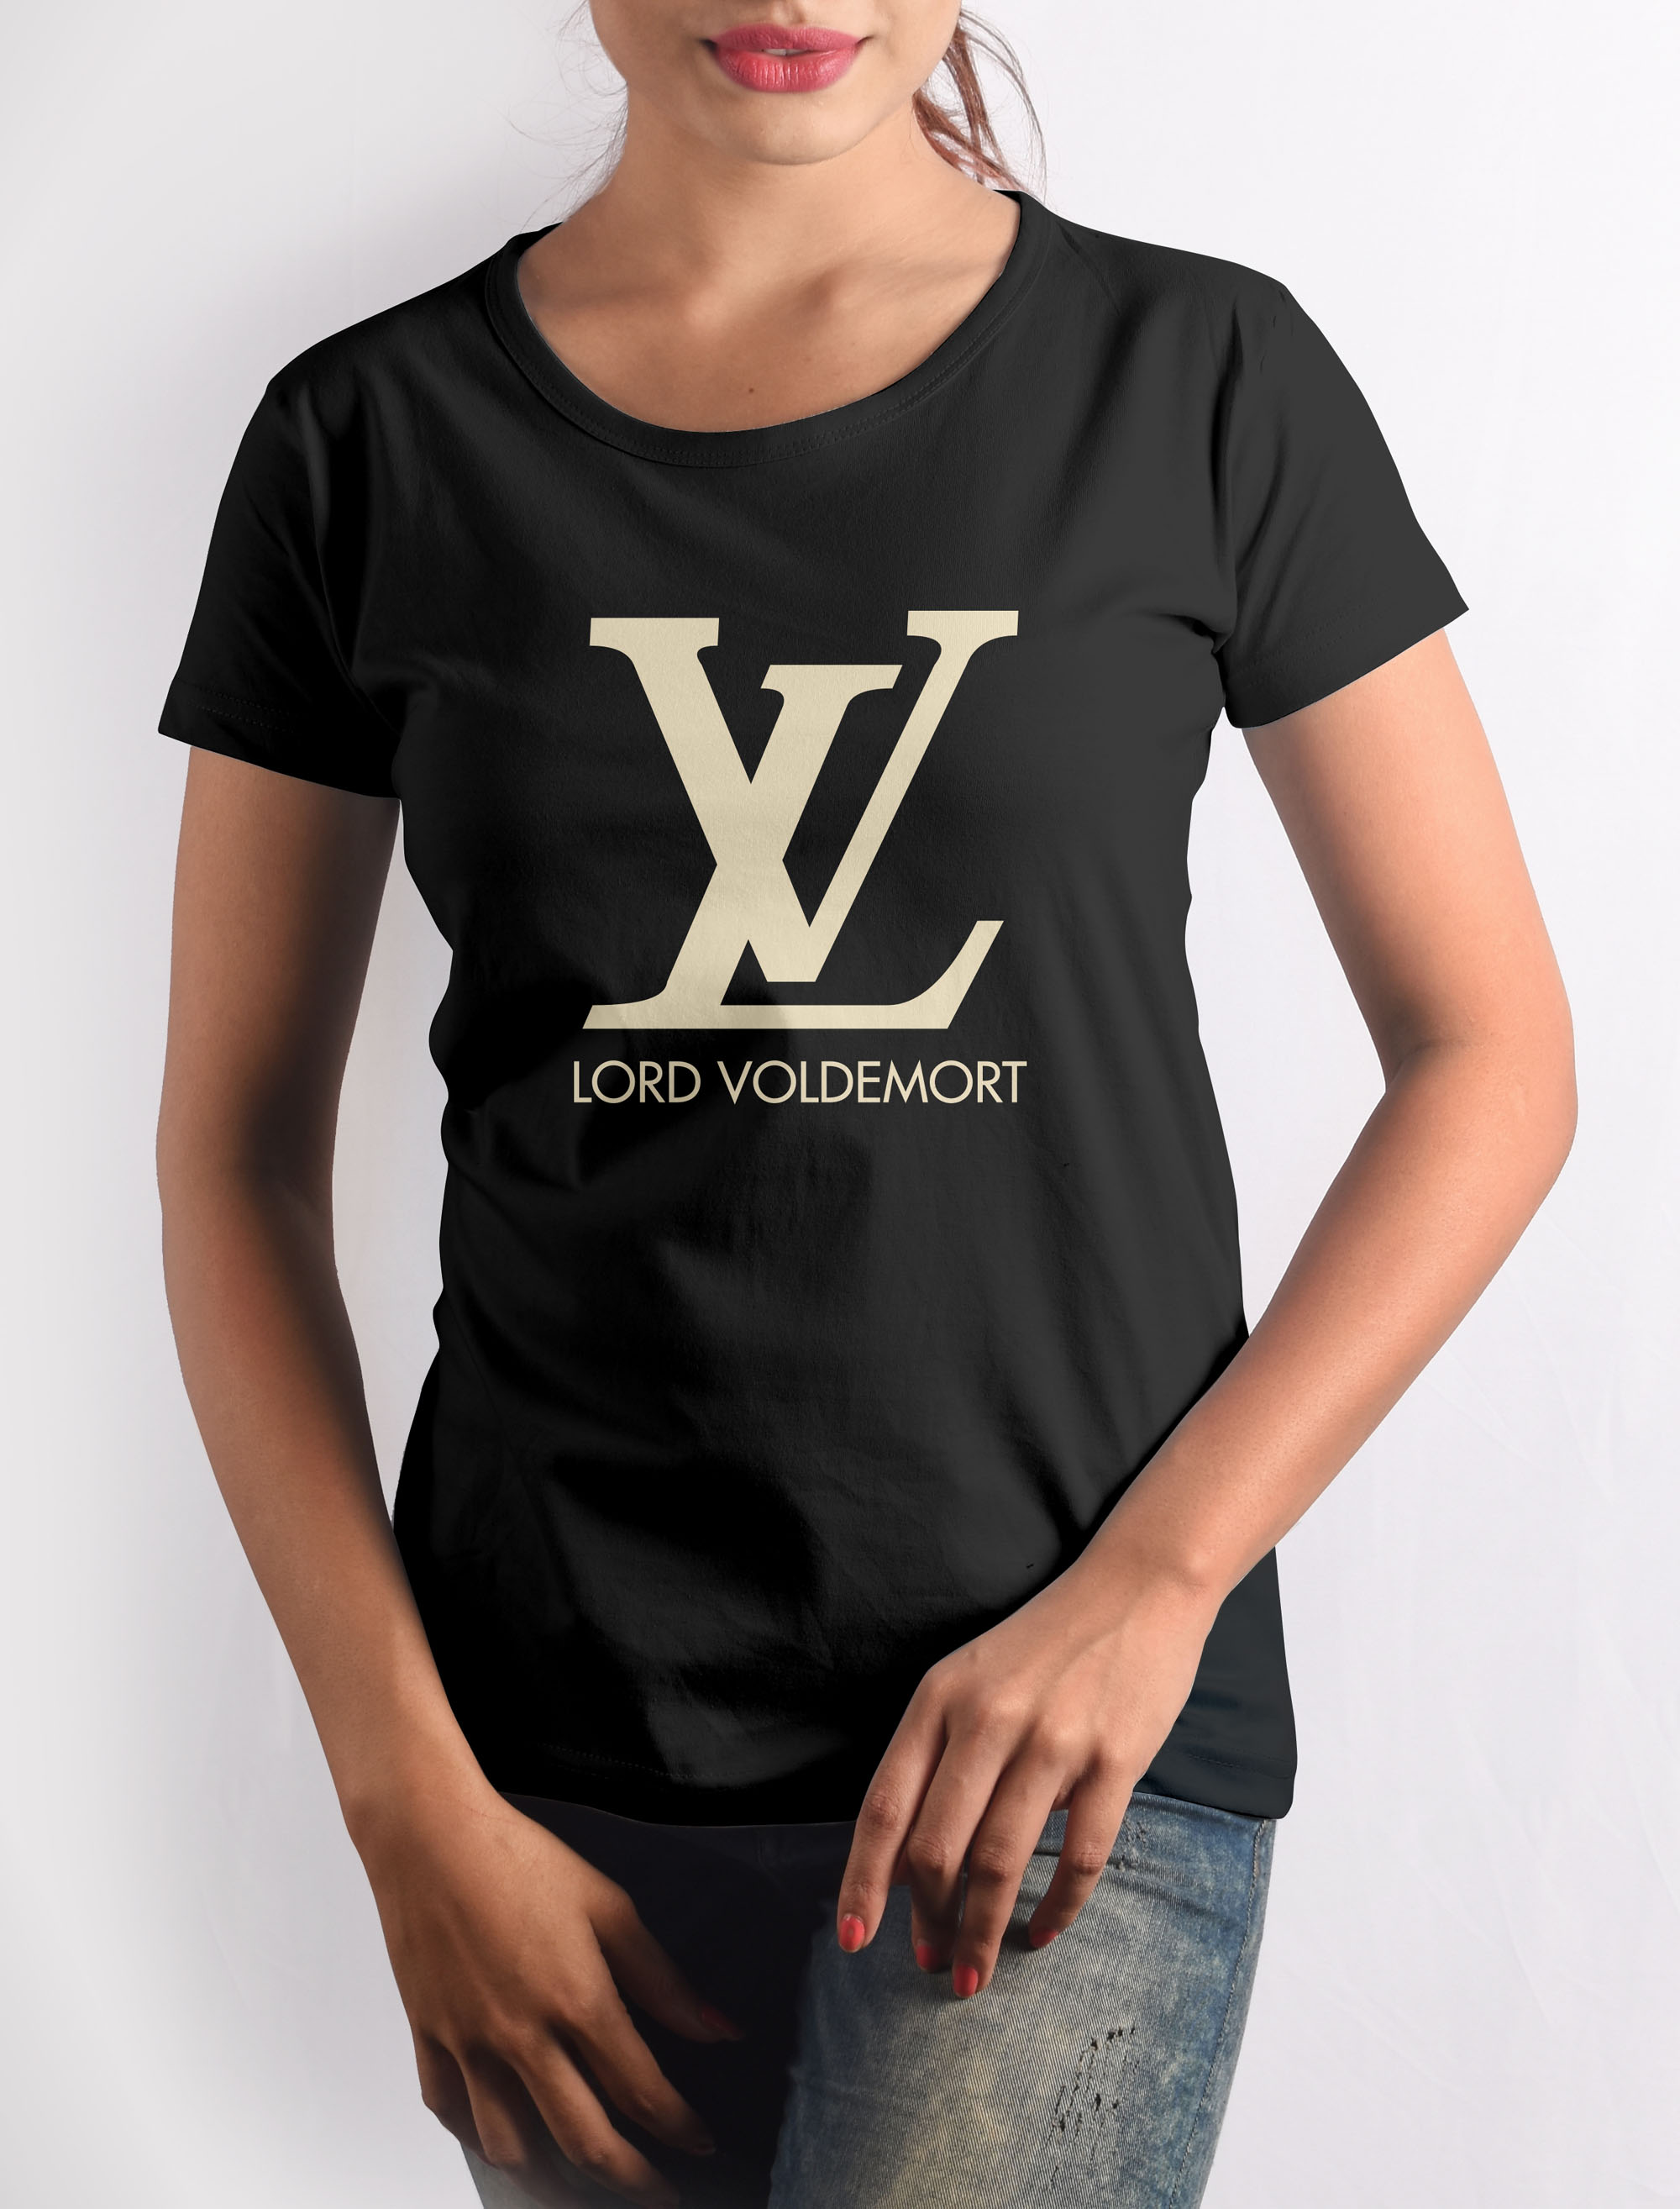 Louis Vuitton Lord Voldemort LV Shirt - Vintage & Classic Tee